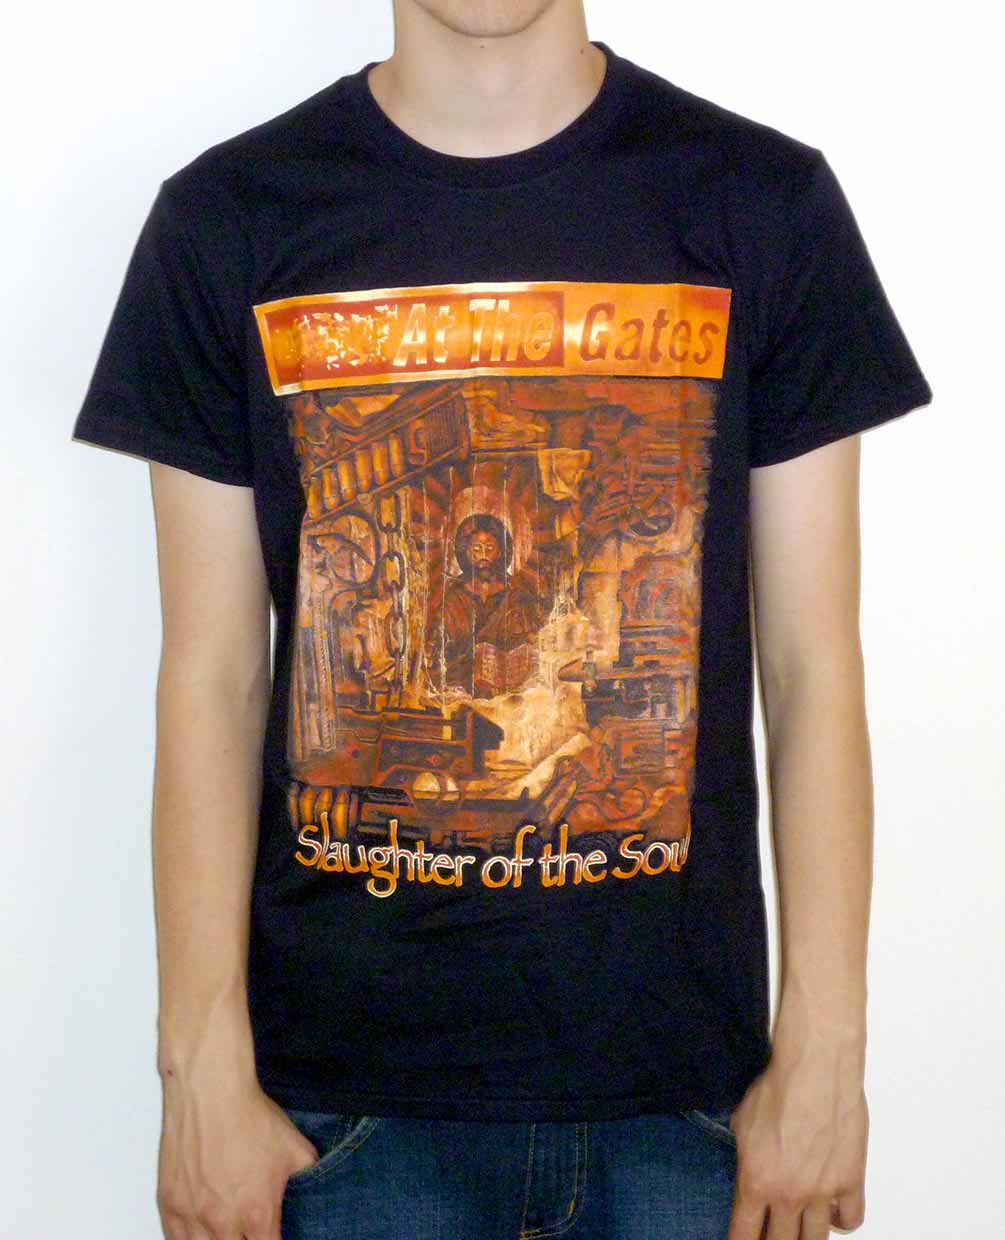 At The Gates "Slaughter Of The Soul" Classic T-shirt